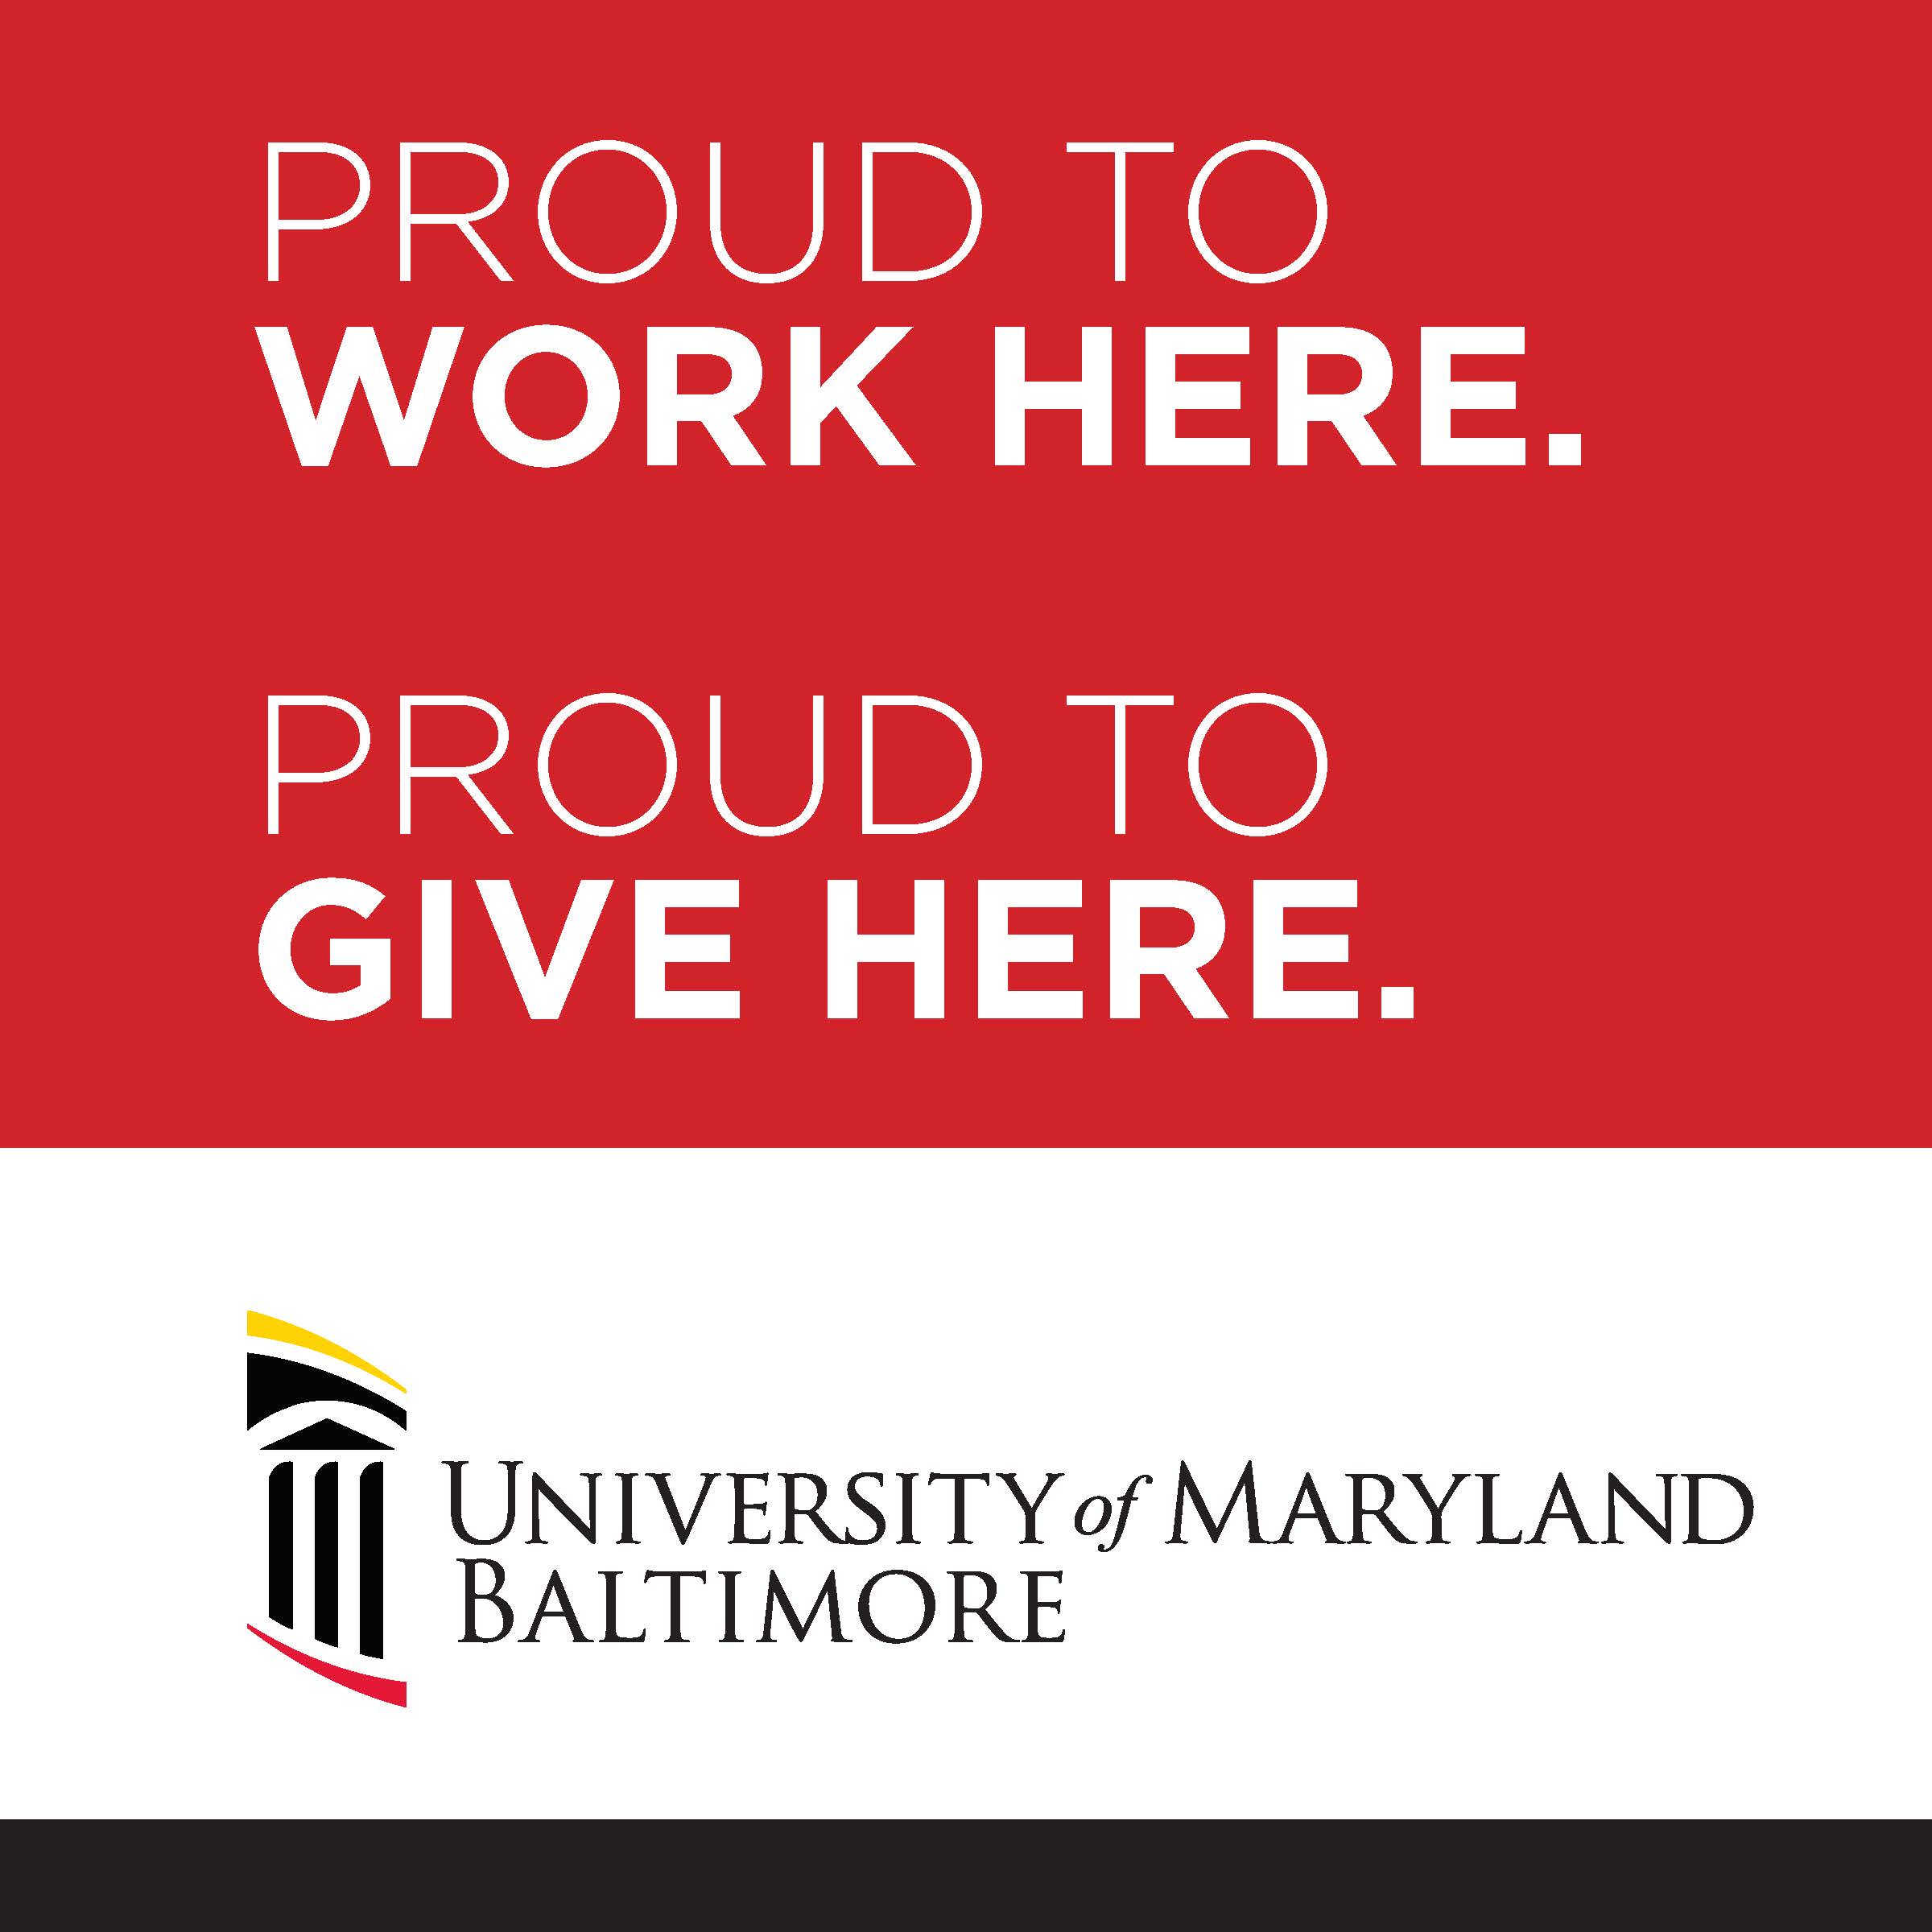 Proud to Work Here campaign graphic